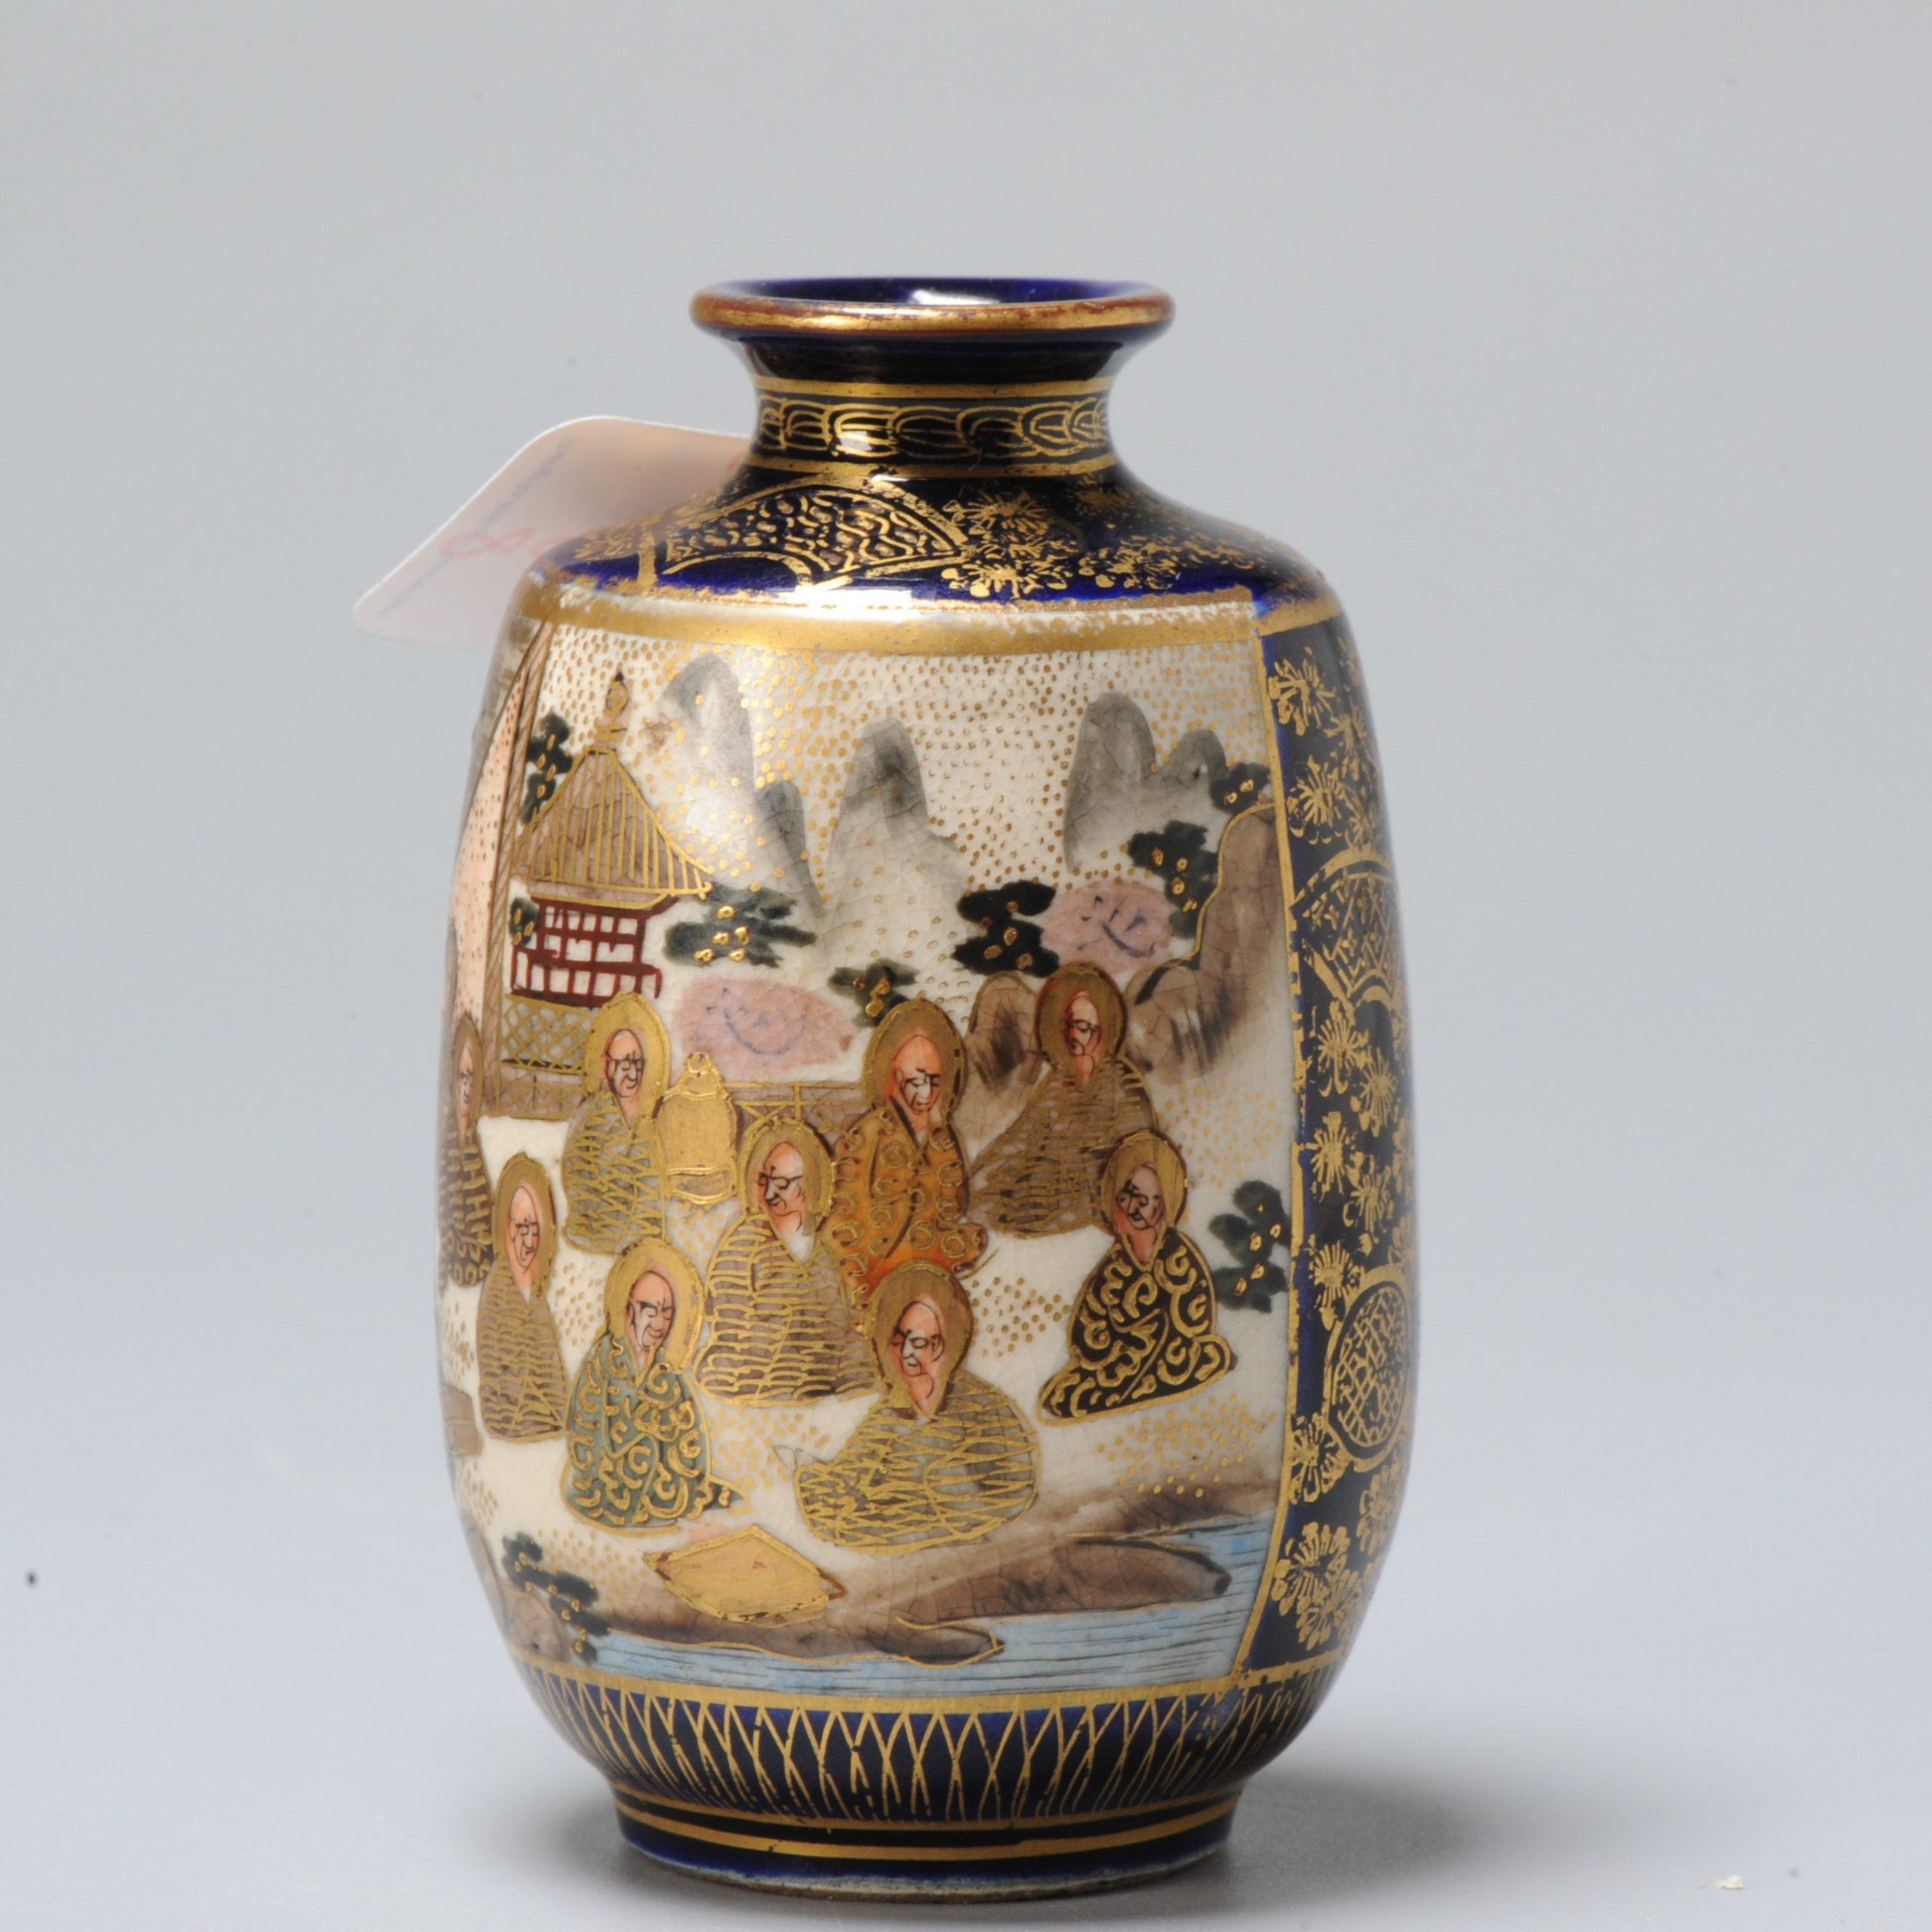 Fabulous and small japanese earthenware Satsuma vase of great shape and scene. With nice purple/blue ground and Arhats/Elegant ladies scene.

Marked:

Additional information:
Material: Porcelain & Pottery
Type: Tea/Coffee Drinking: Bowls, Cups &